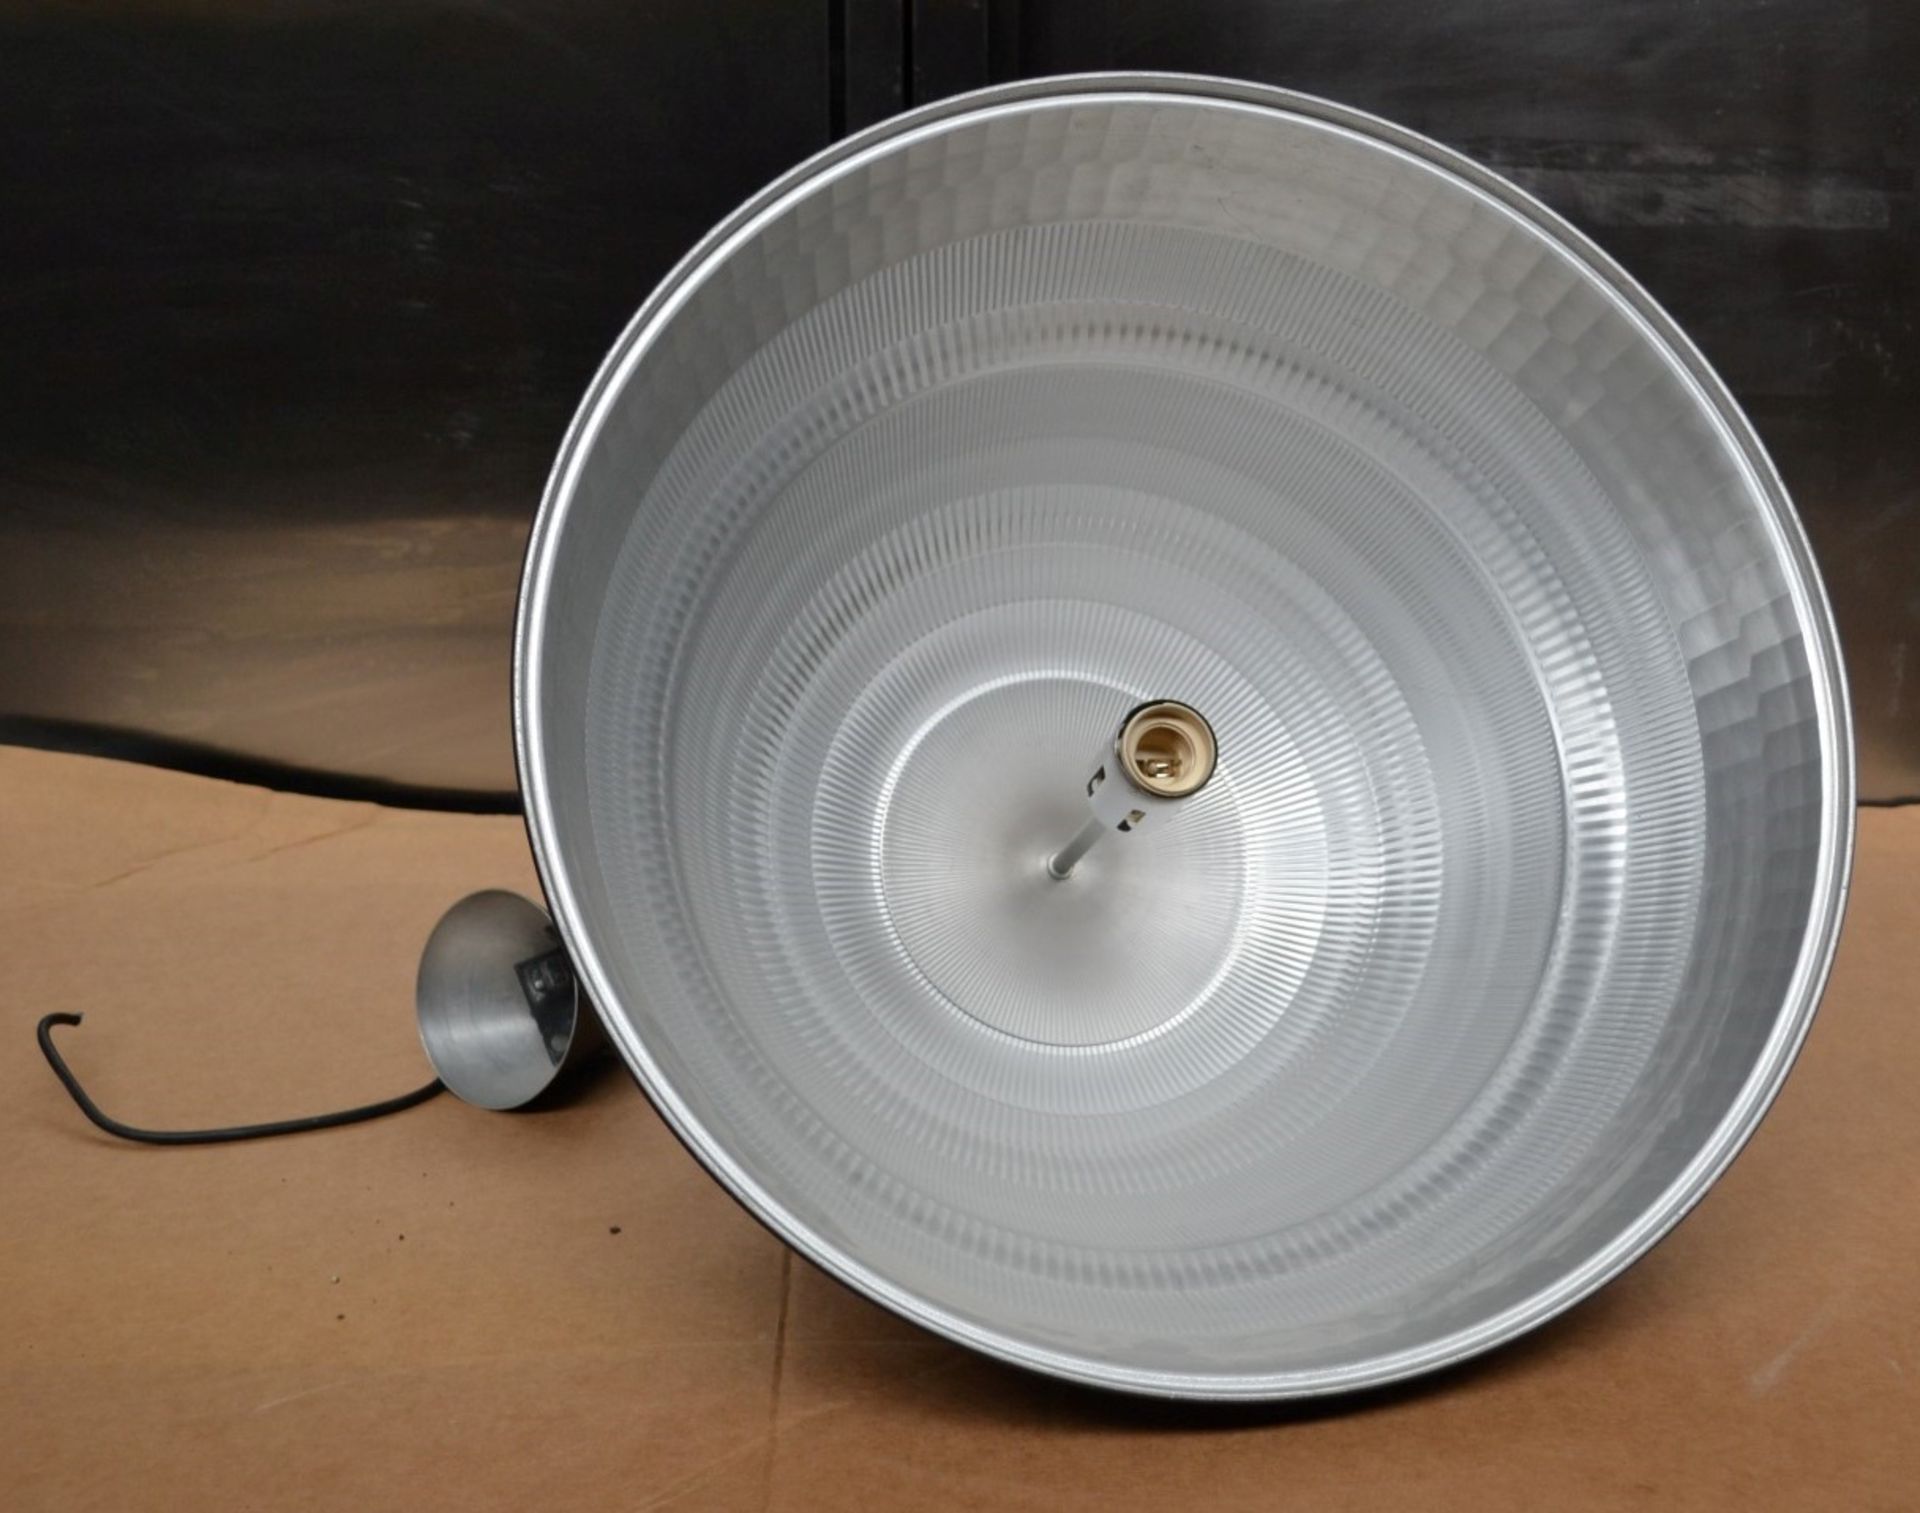 2 x Large Retro Industrial-style Pendant Ceiling Light Fittings - Colour: Black / White - Stylish - Image 3 of 3